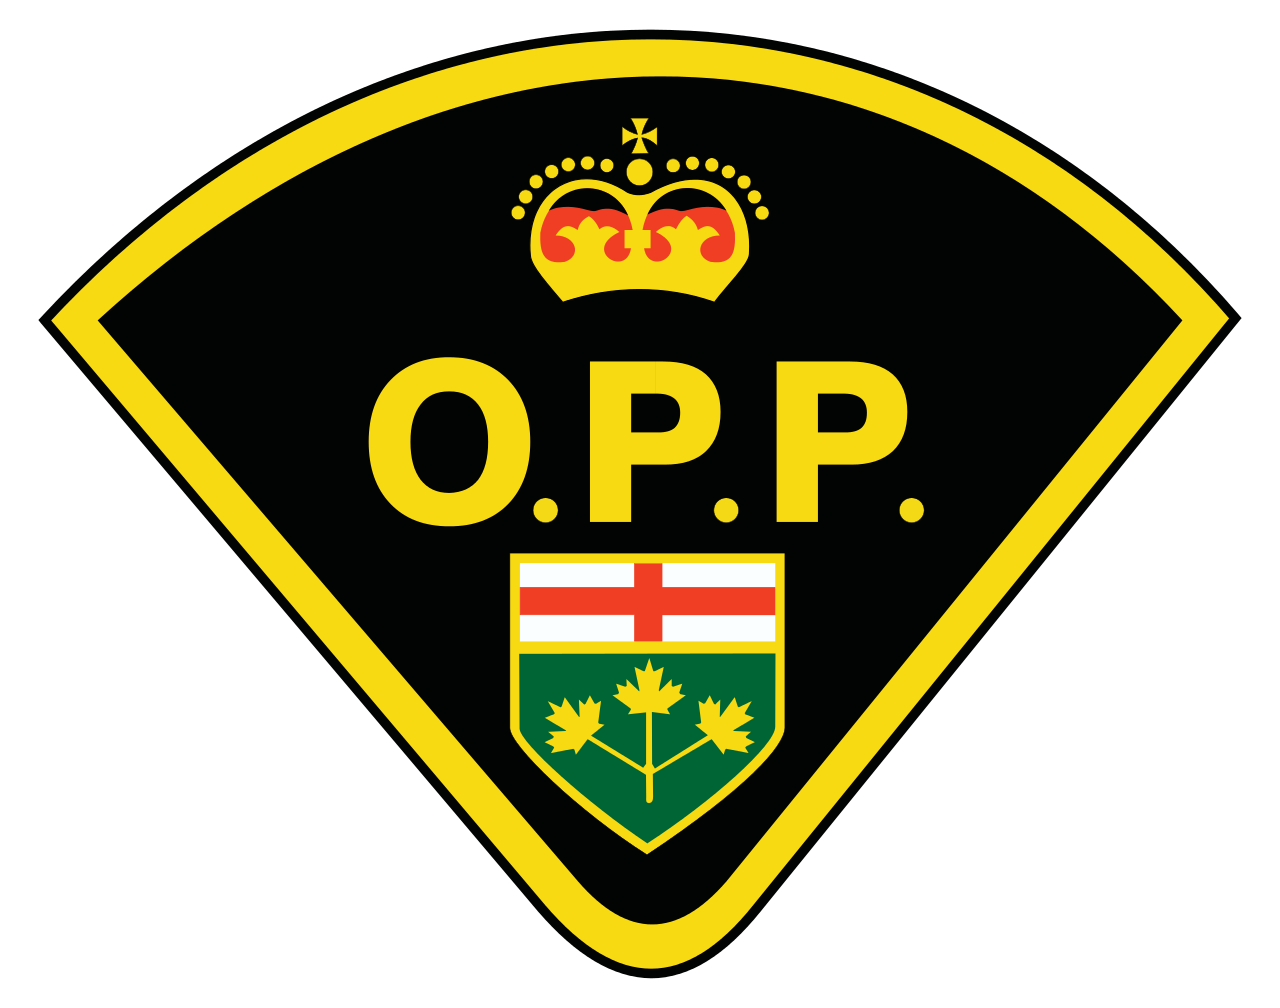 ONTARIO PROVINCIAL POLICE: FIREARMS POLICIES AND STATISTICS